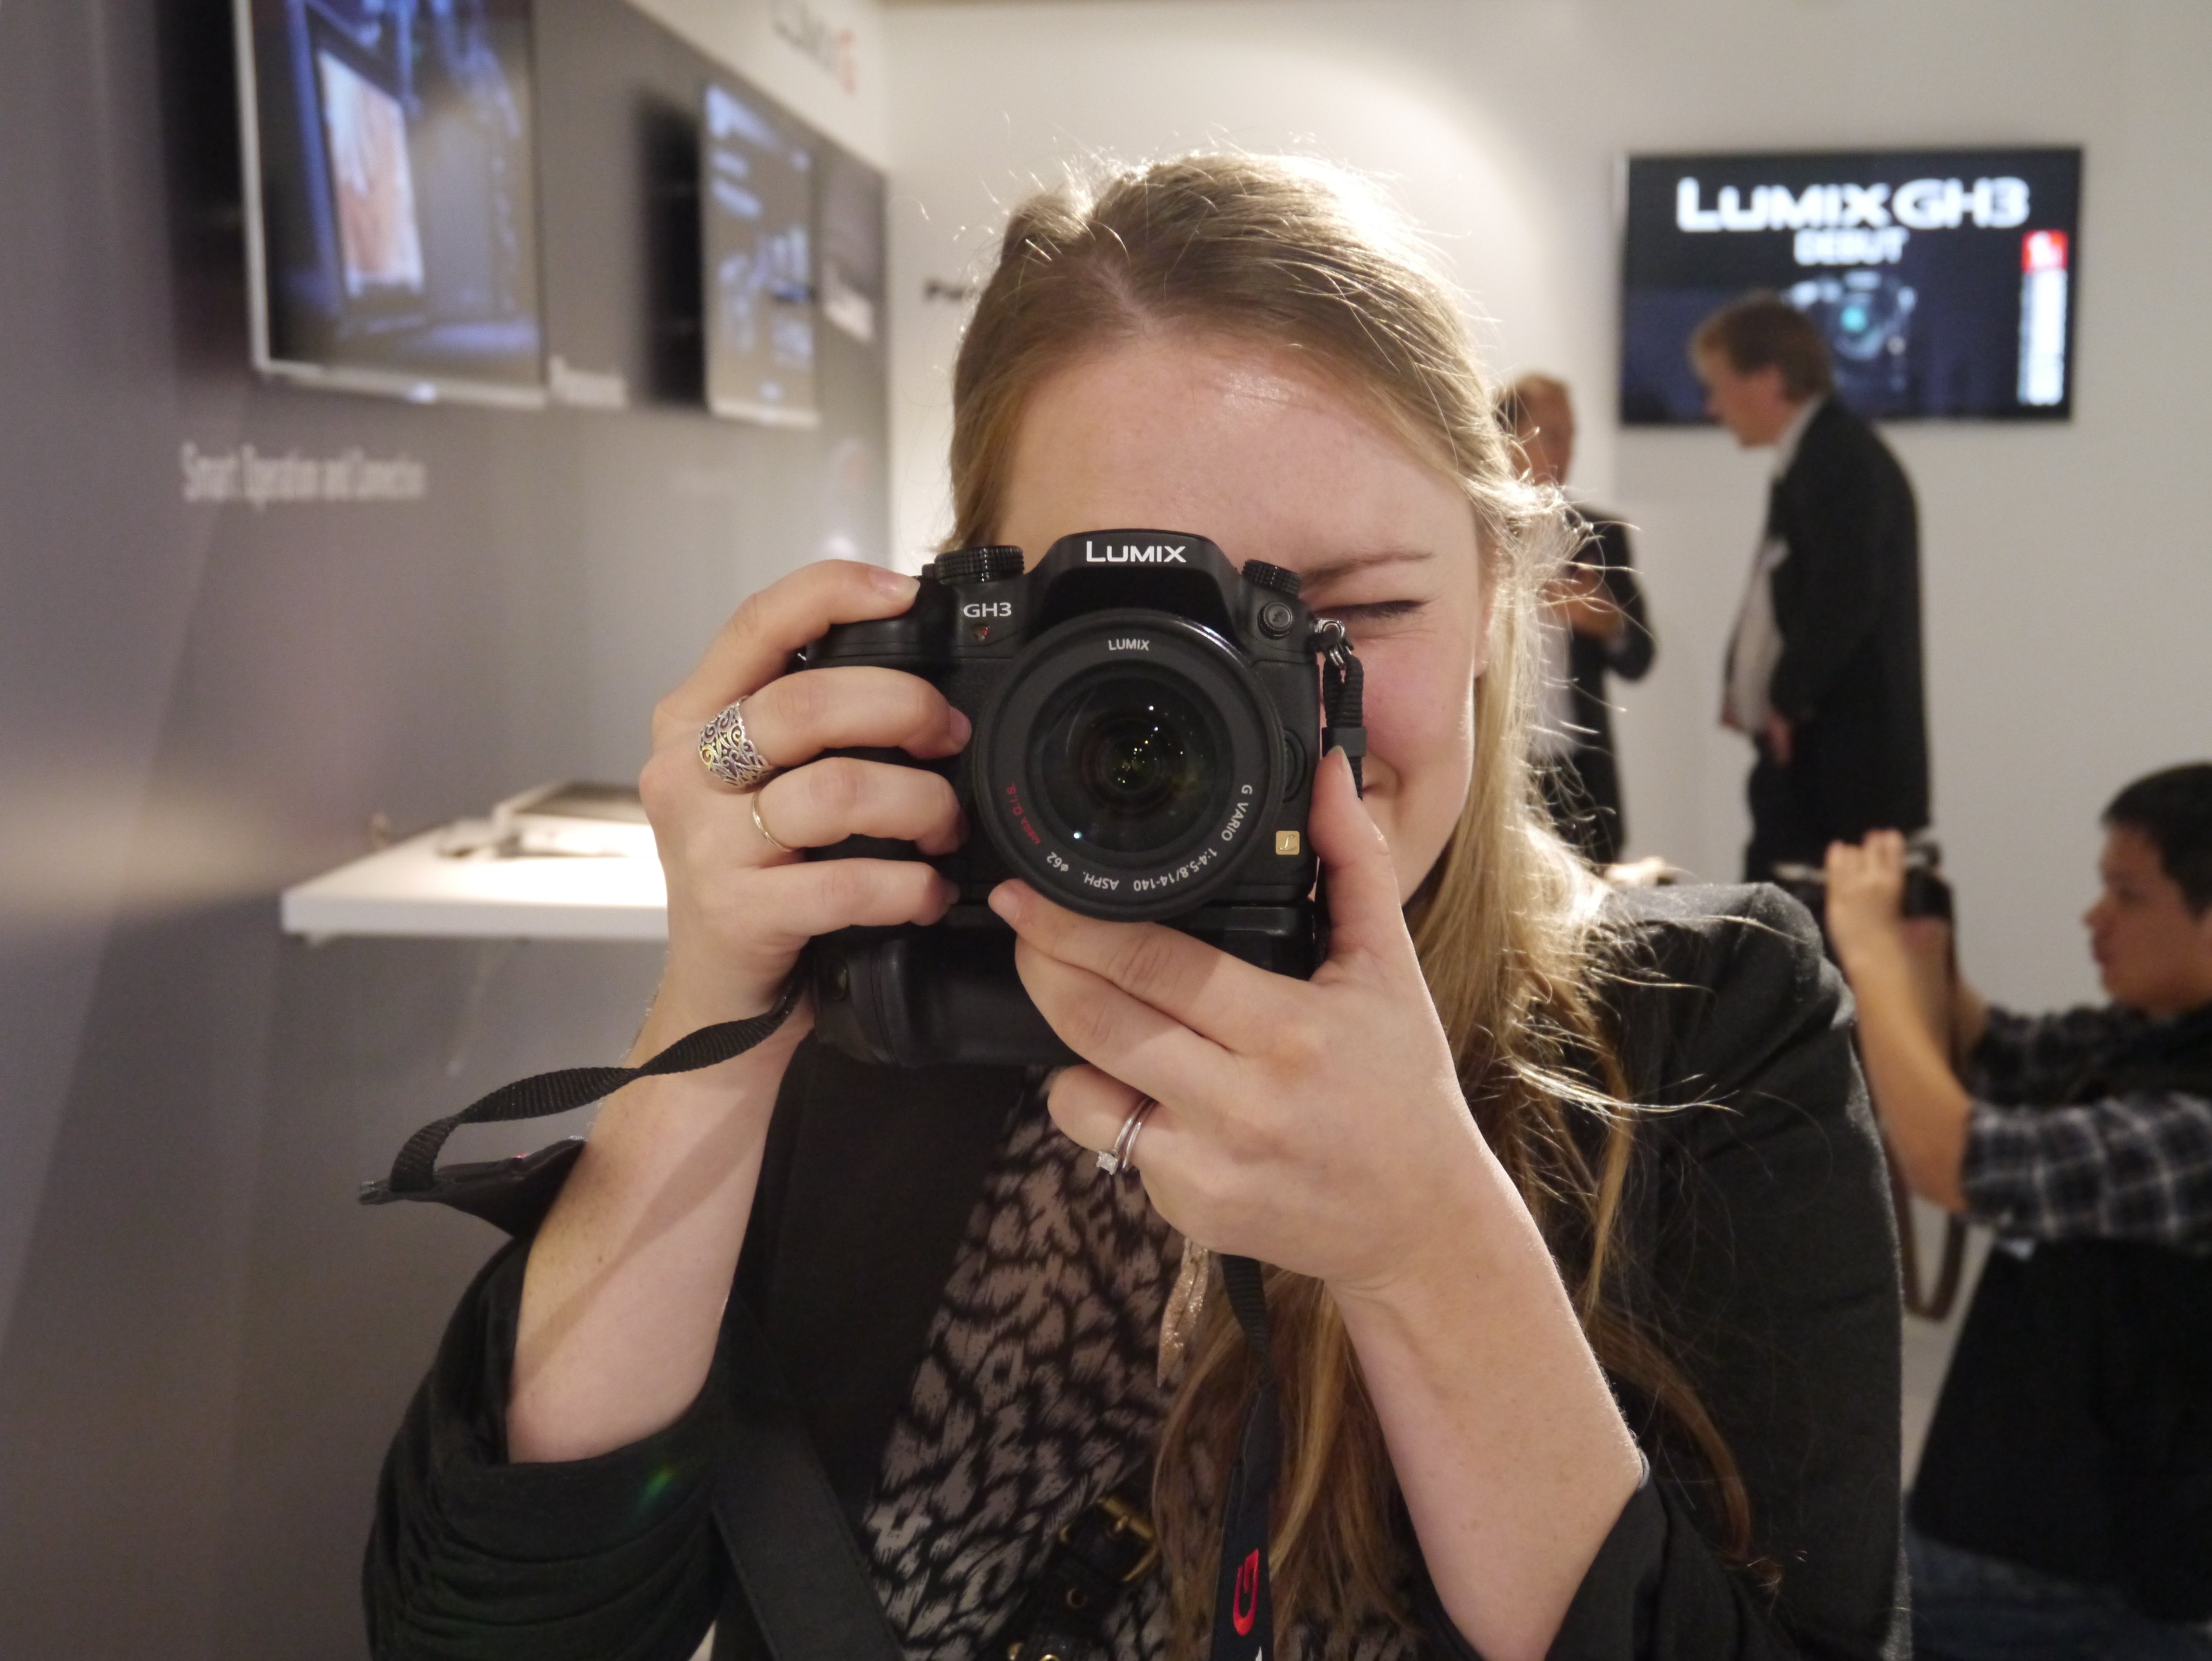 Testing out the LUMIX GH3 with battery grip attached